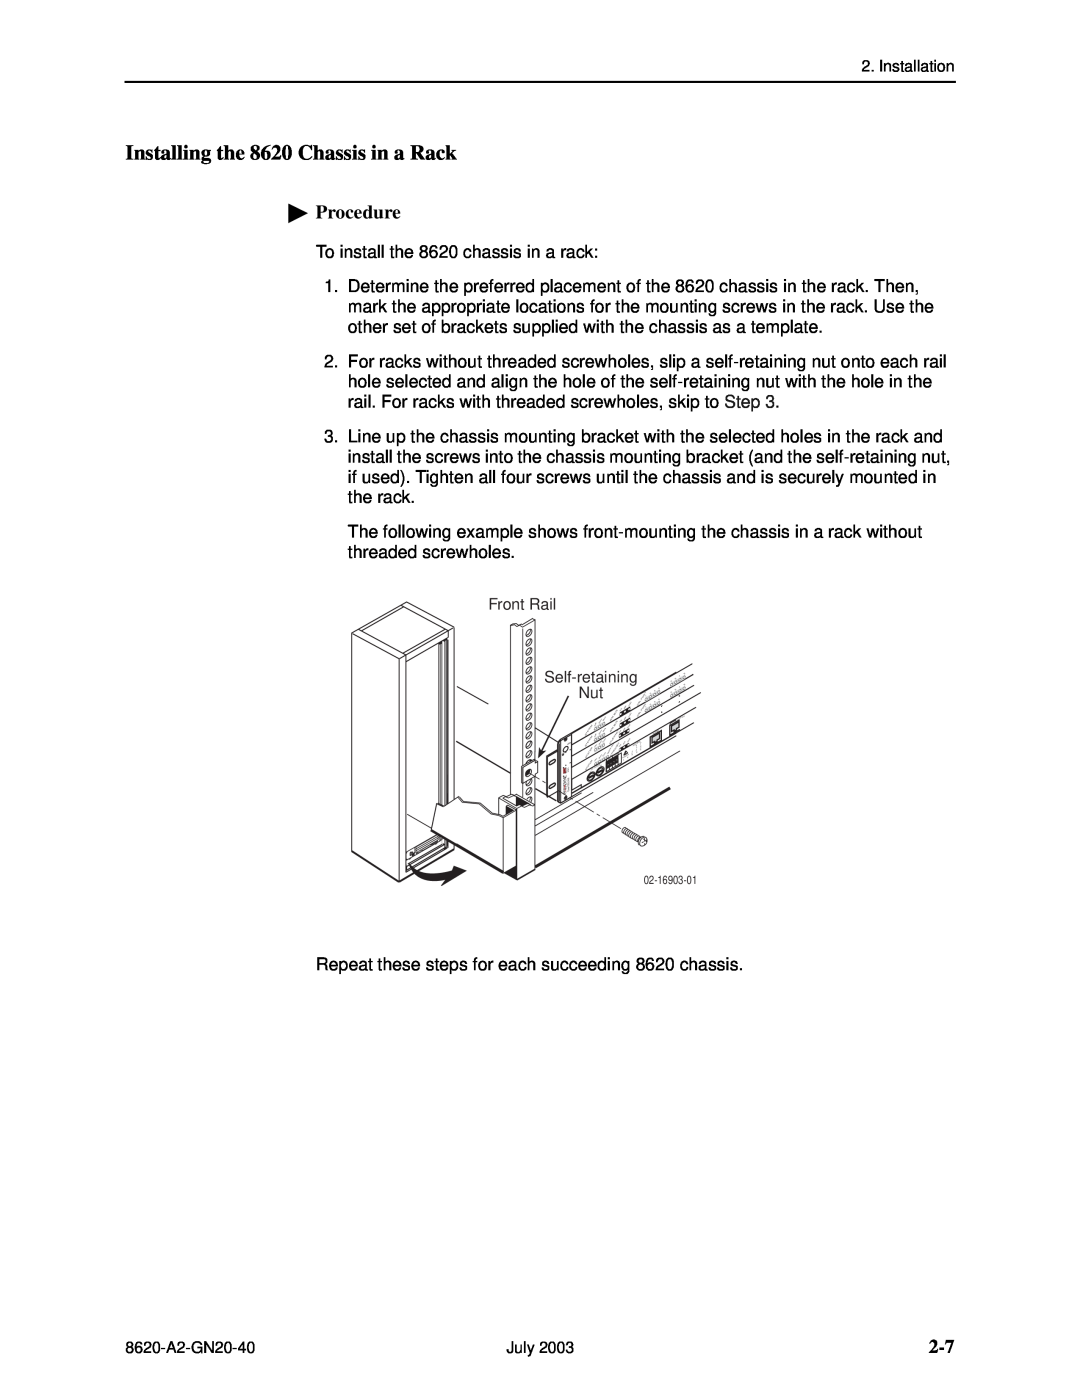 Paradyne Hotwire 8620 GranDSLAM Installation Guide manual Installing the 8620 Chassis in a Rack, Procedure 